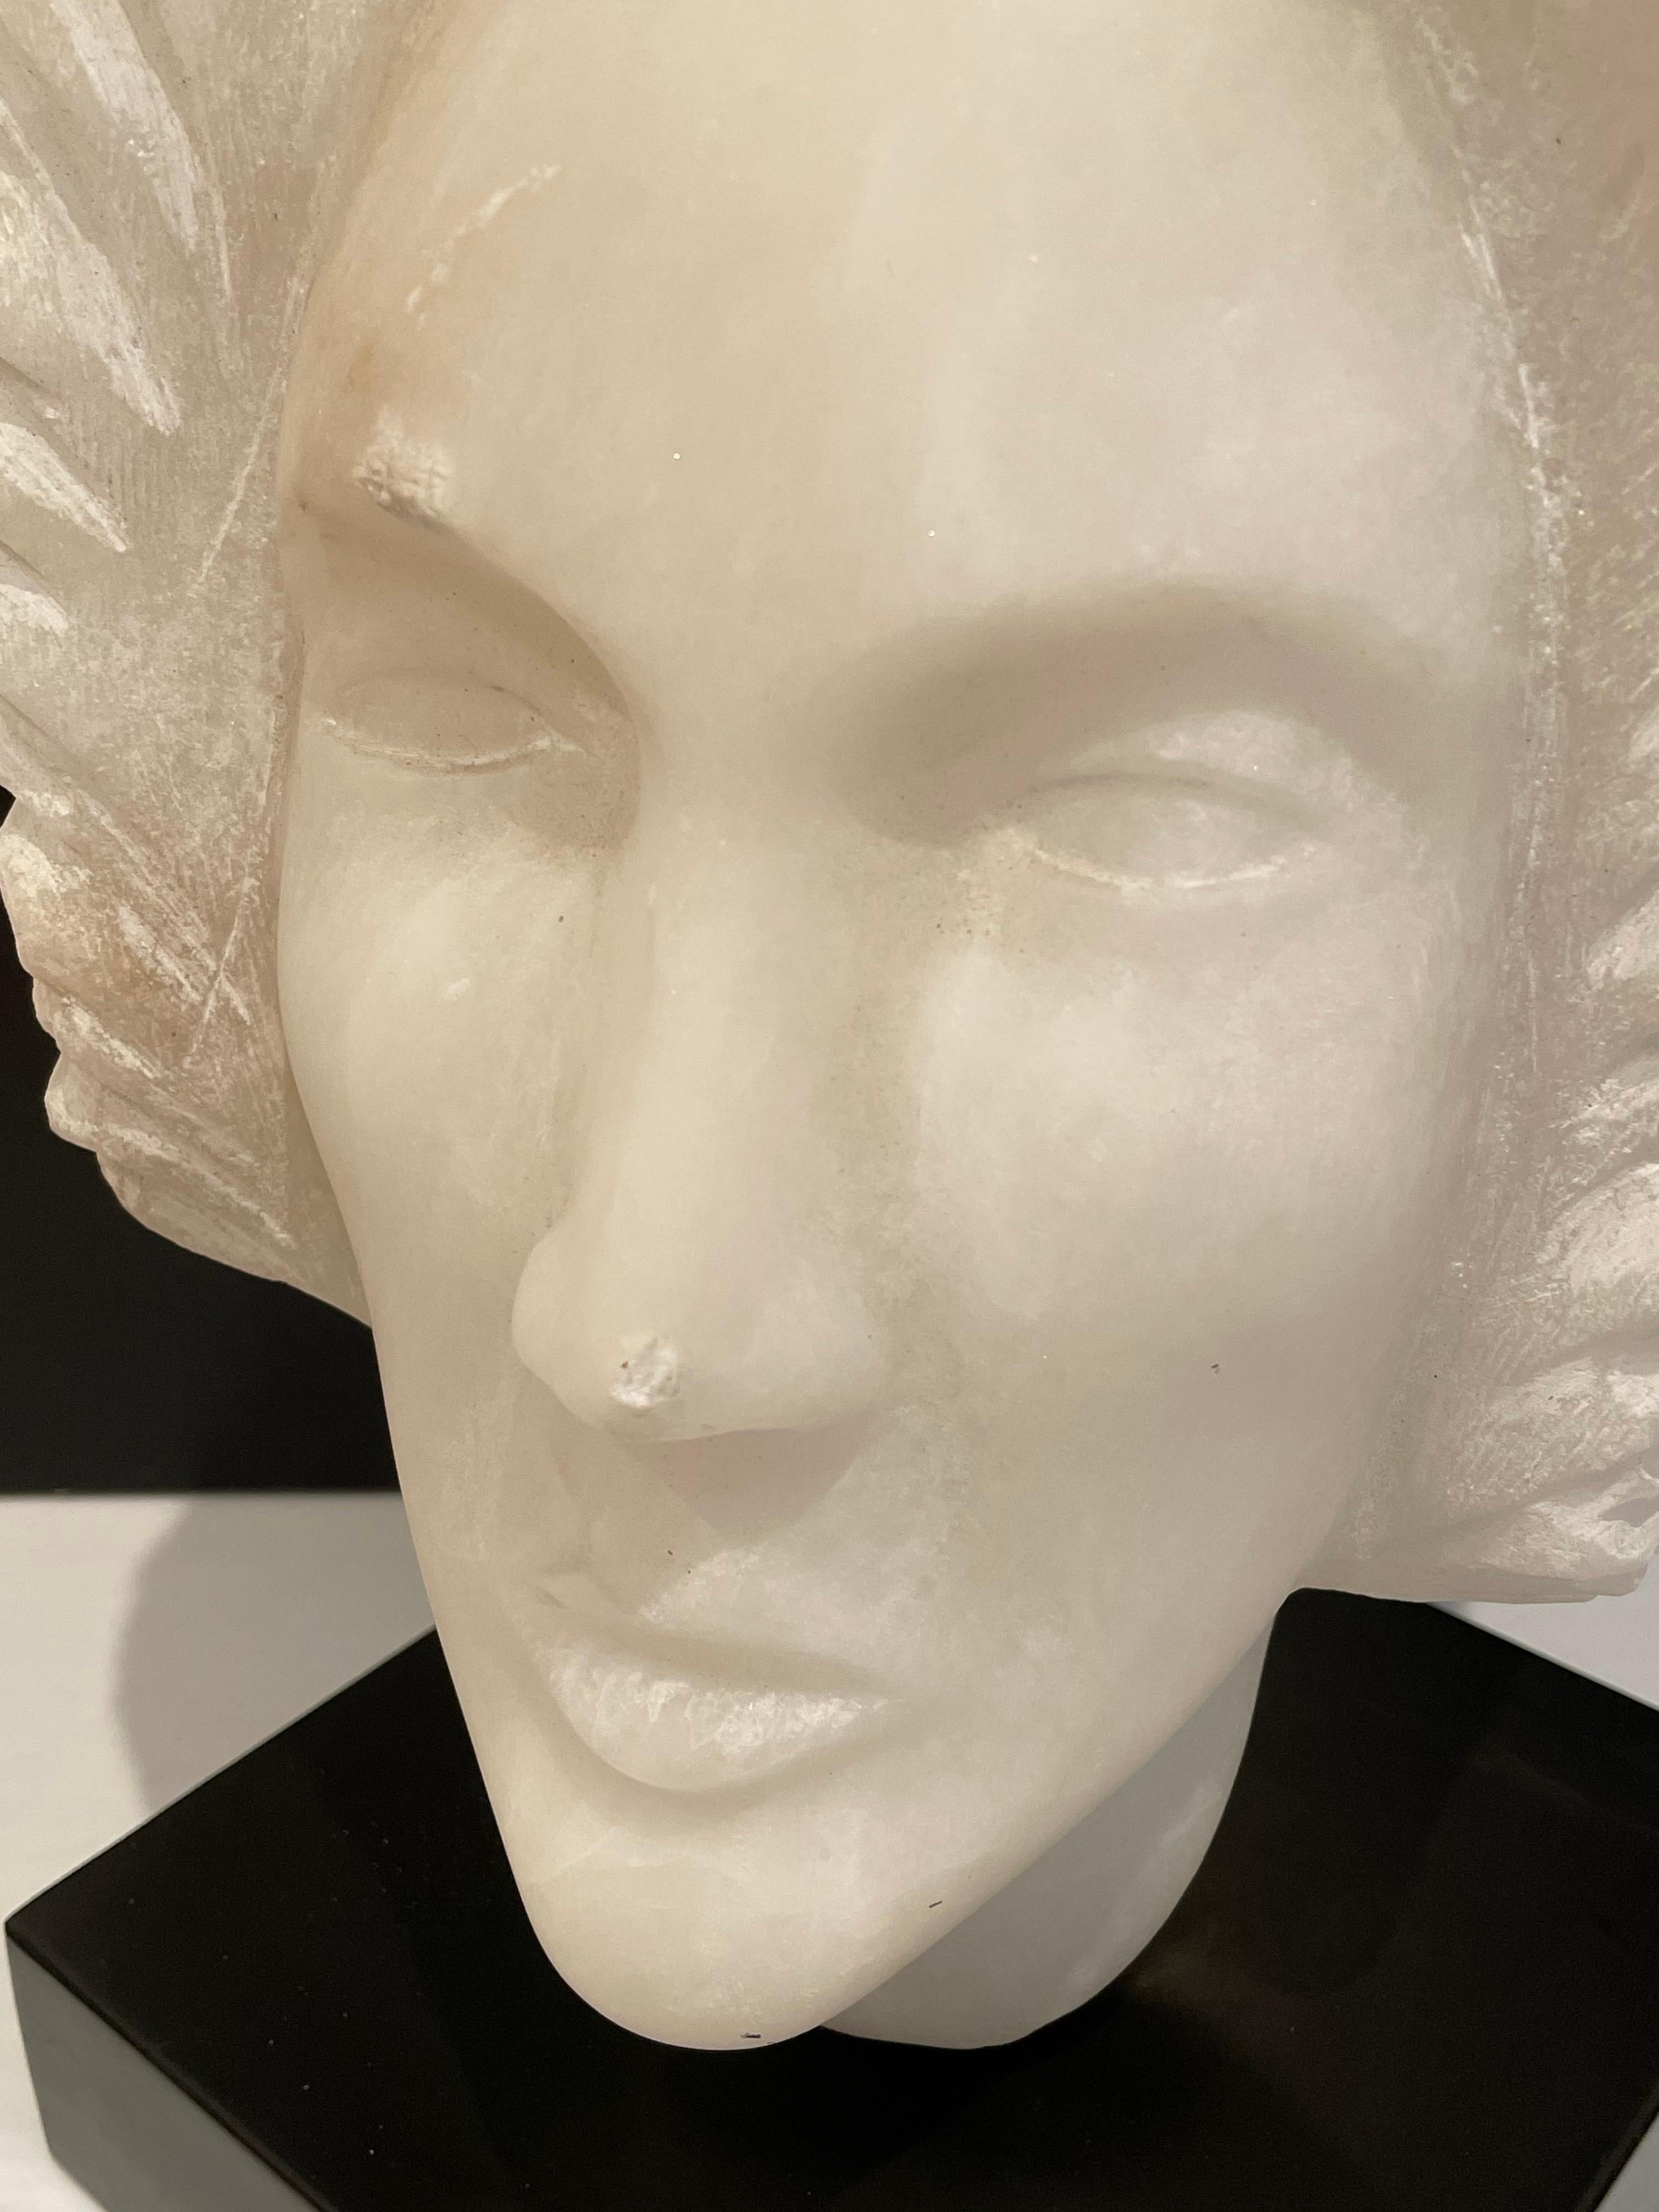 20th Century Alabaster Woman's Head Sculpture on Marble Base Rotates 360 Degree